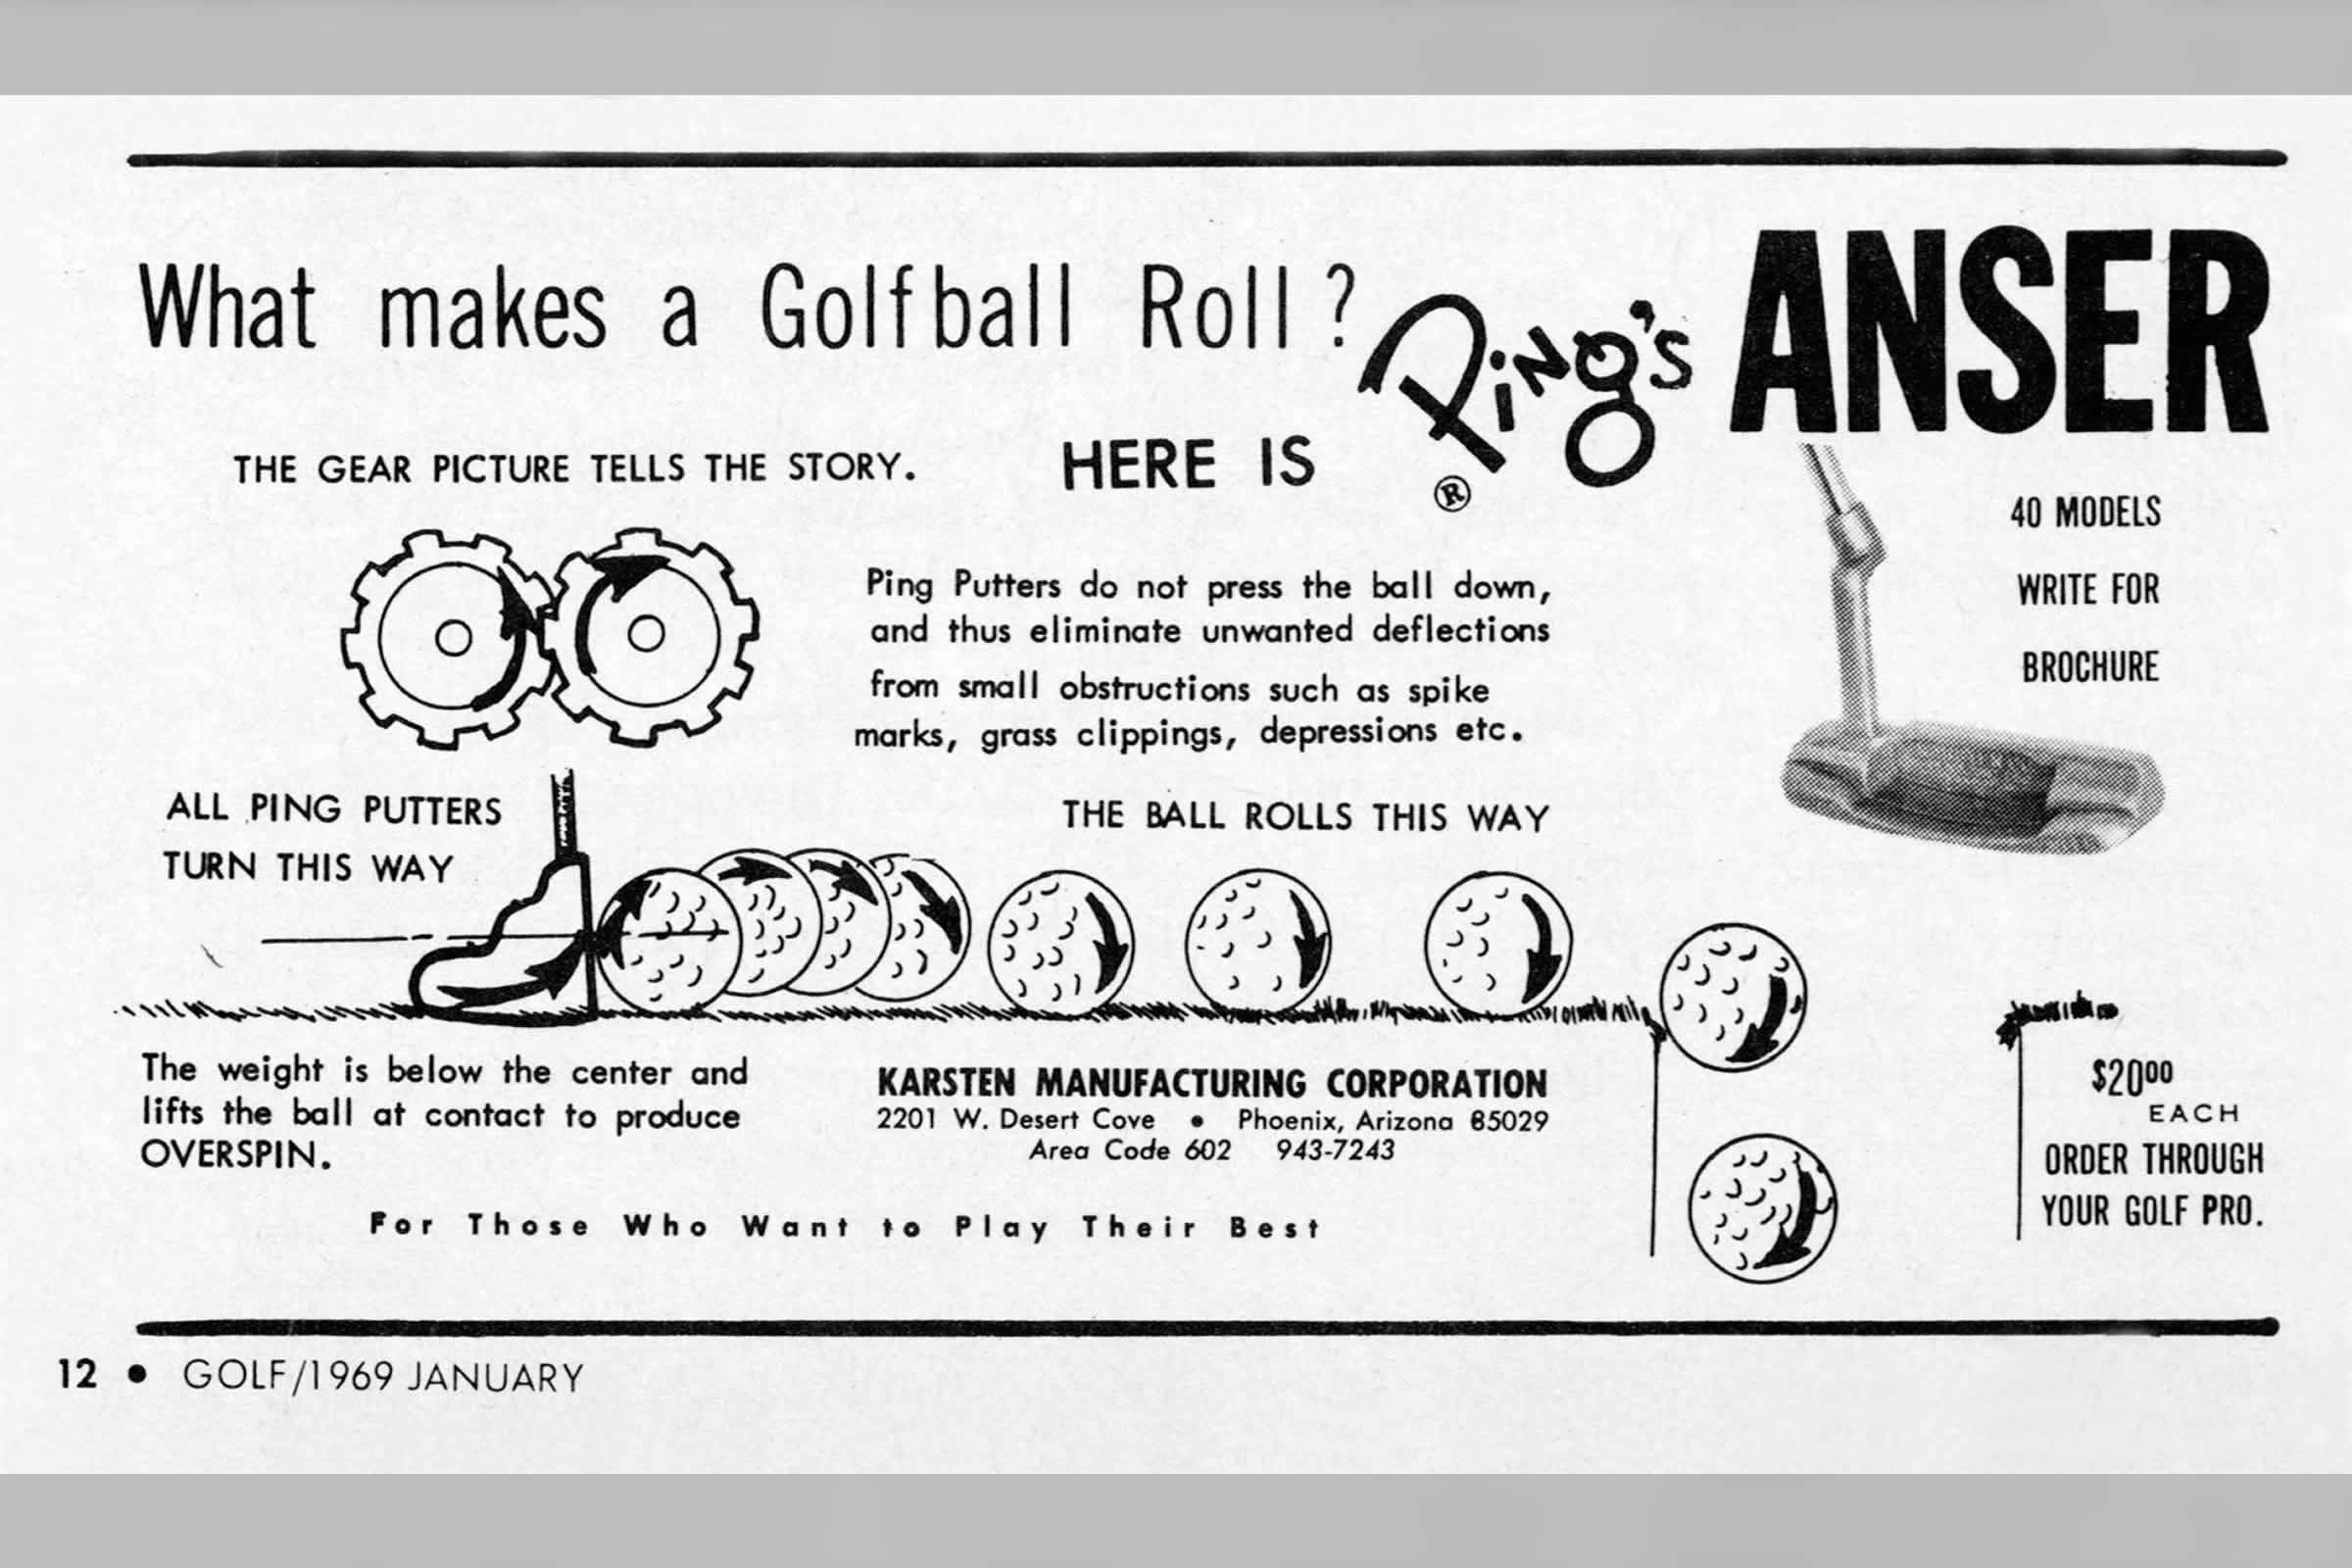 magazine
                                                        advertisment showing how
                                                        the gear effect improves
                                                        roll